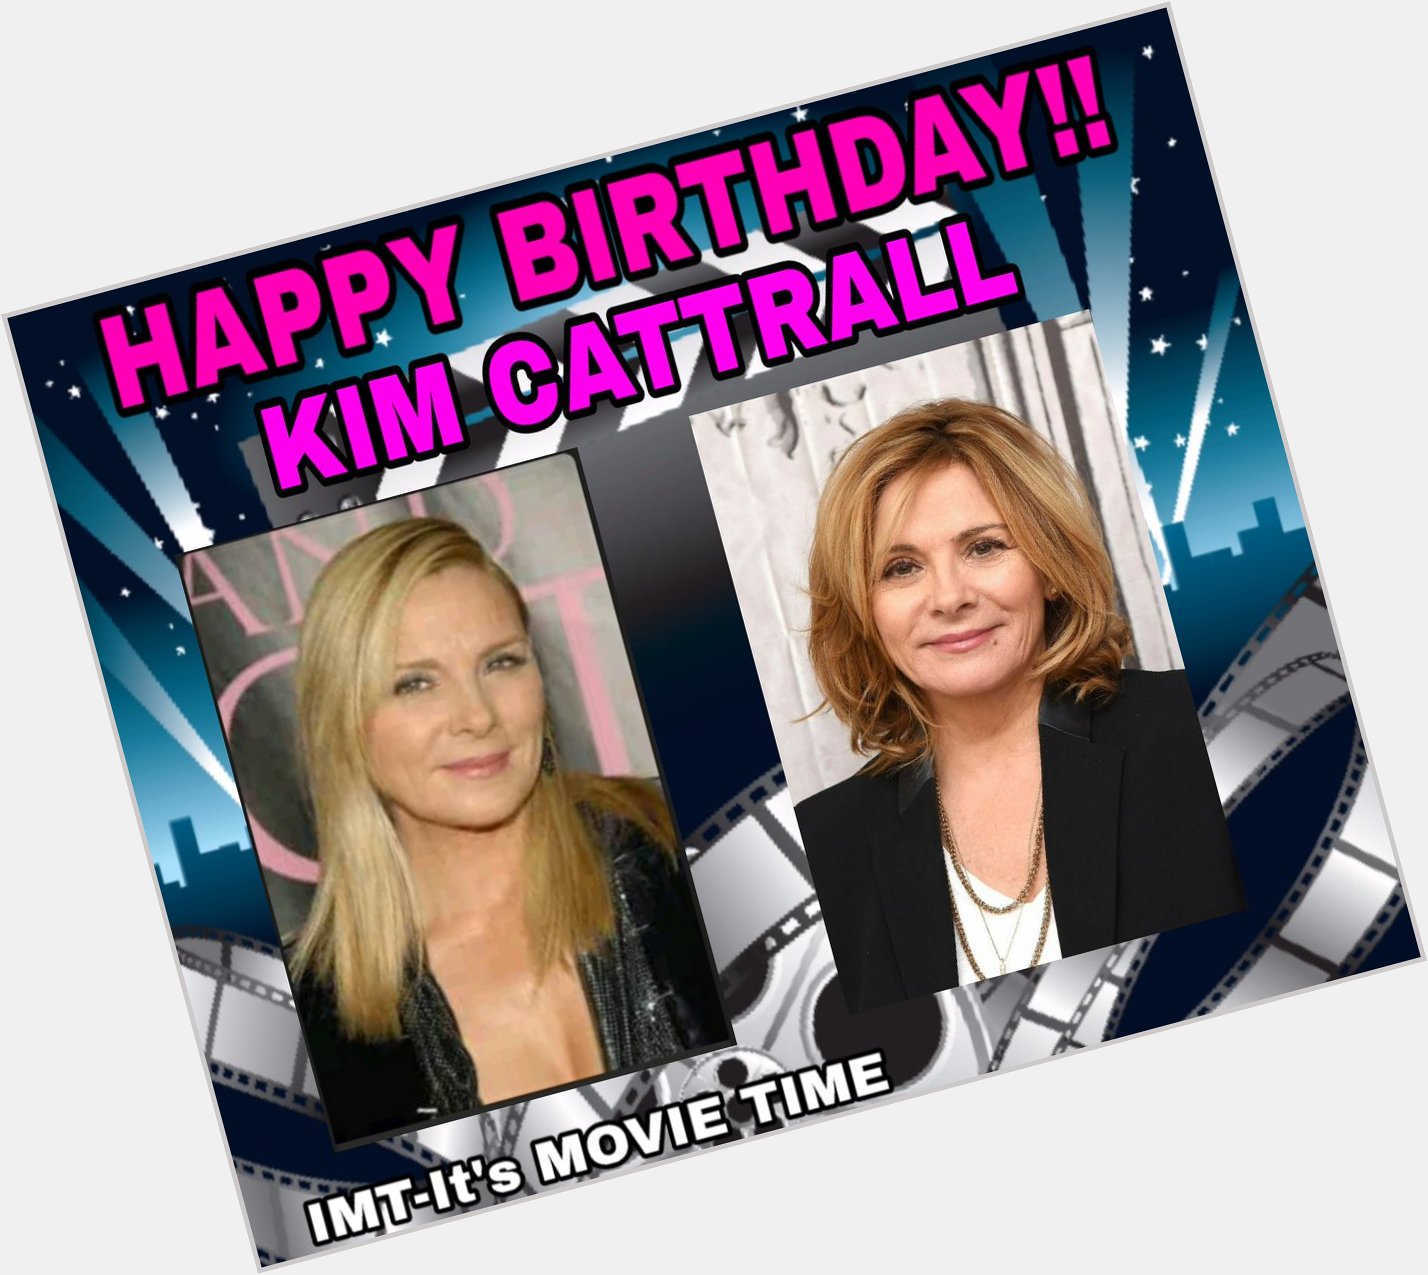 Happy Birthday to Kim Cattrall! She is celebrating 64 years. 